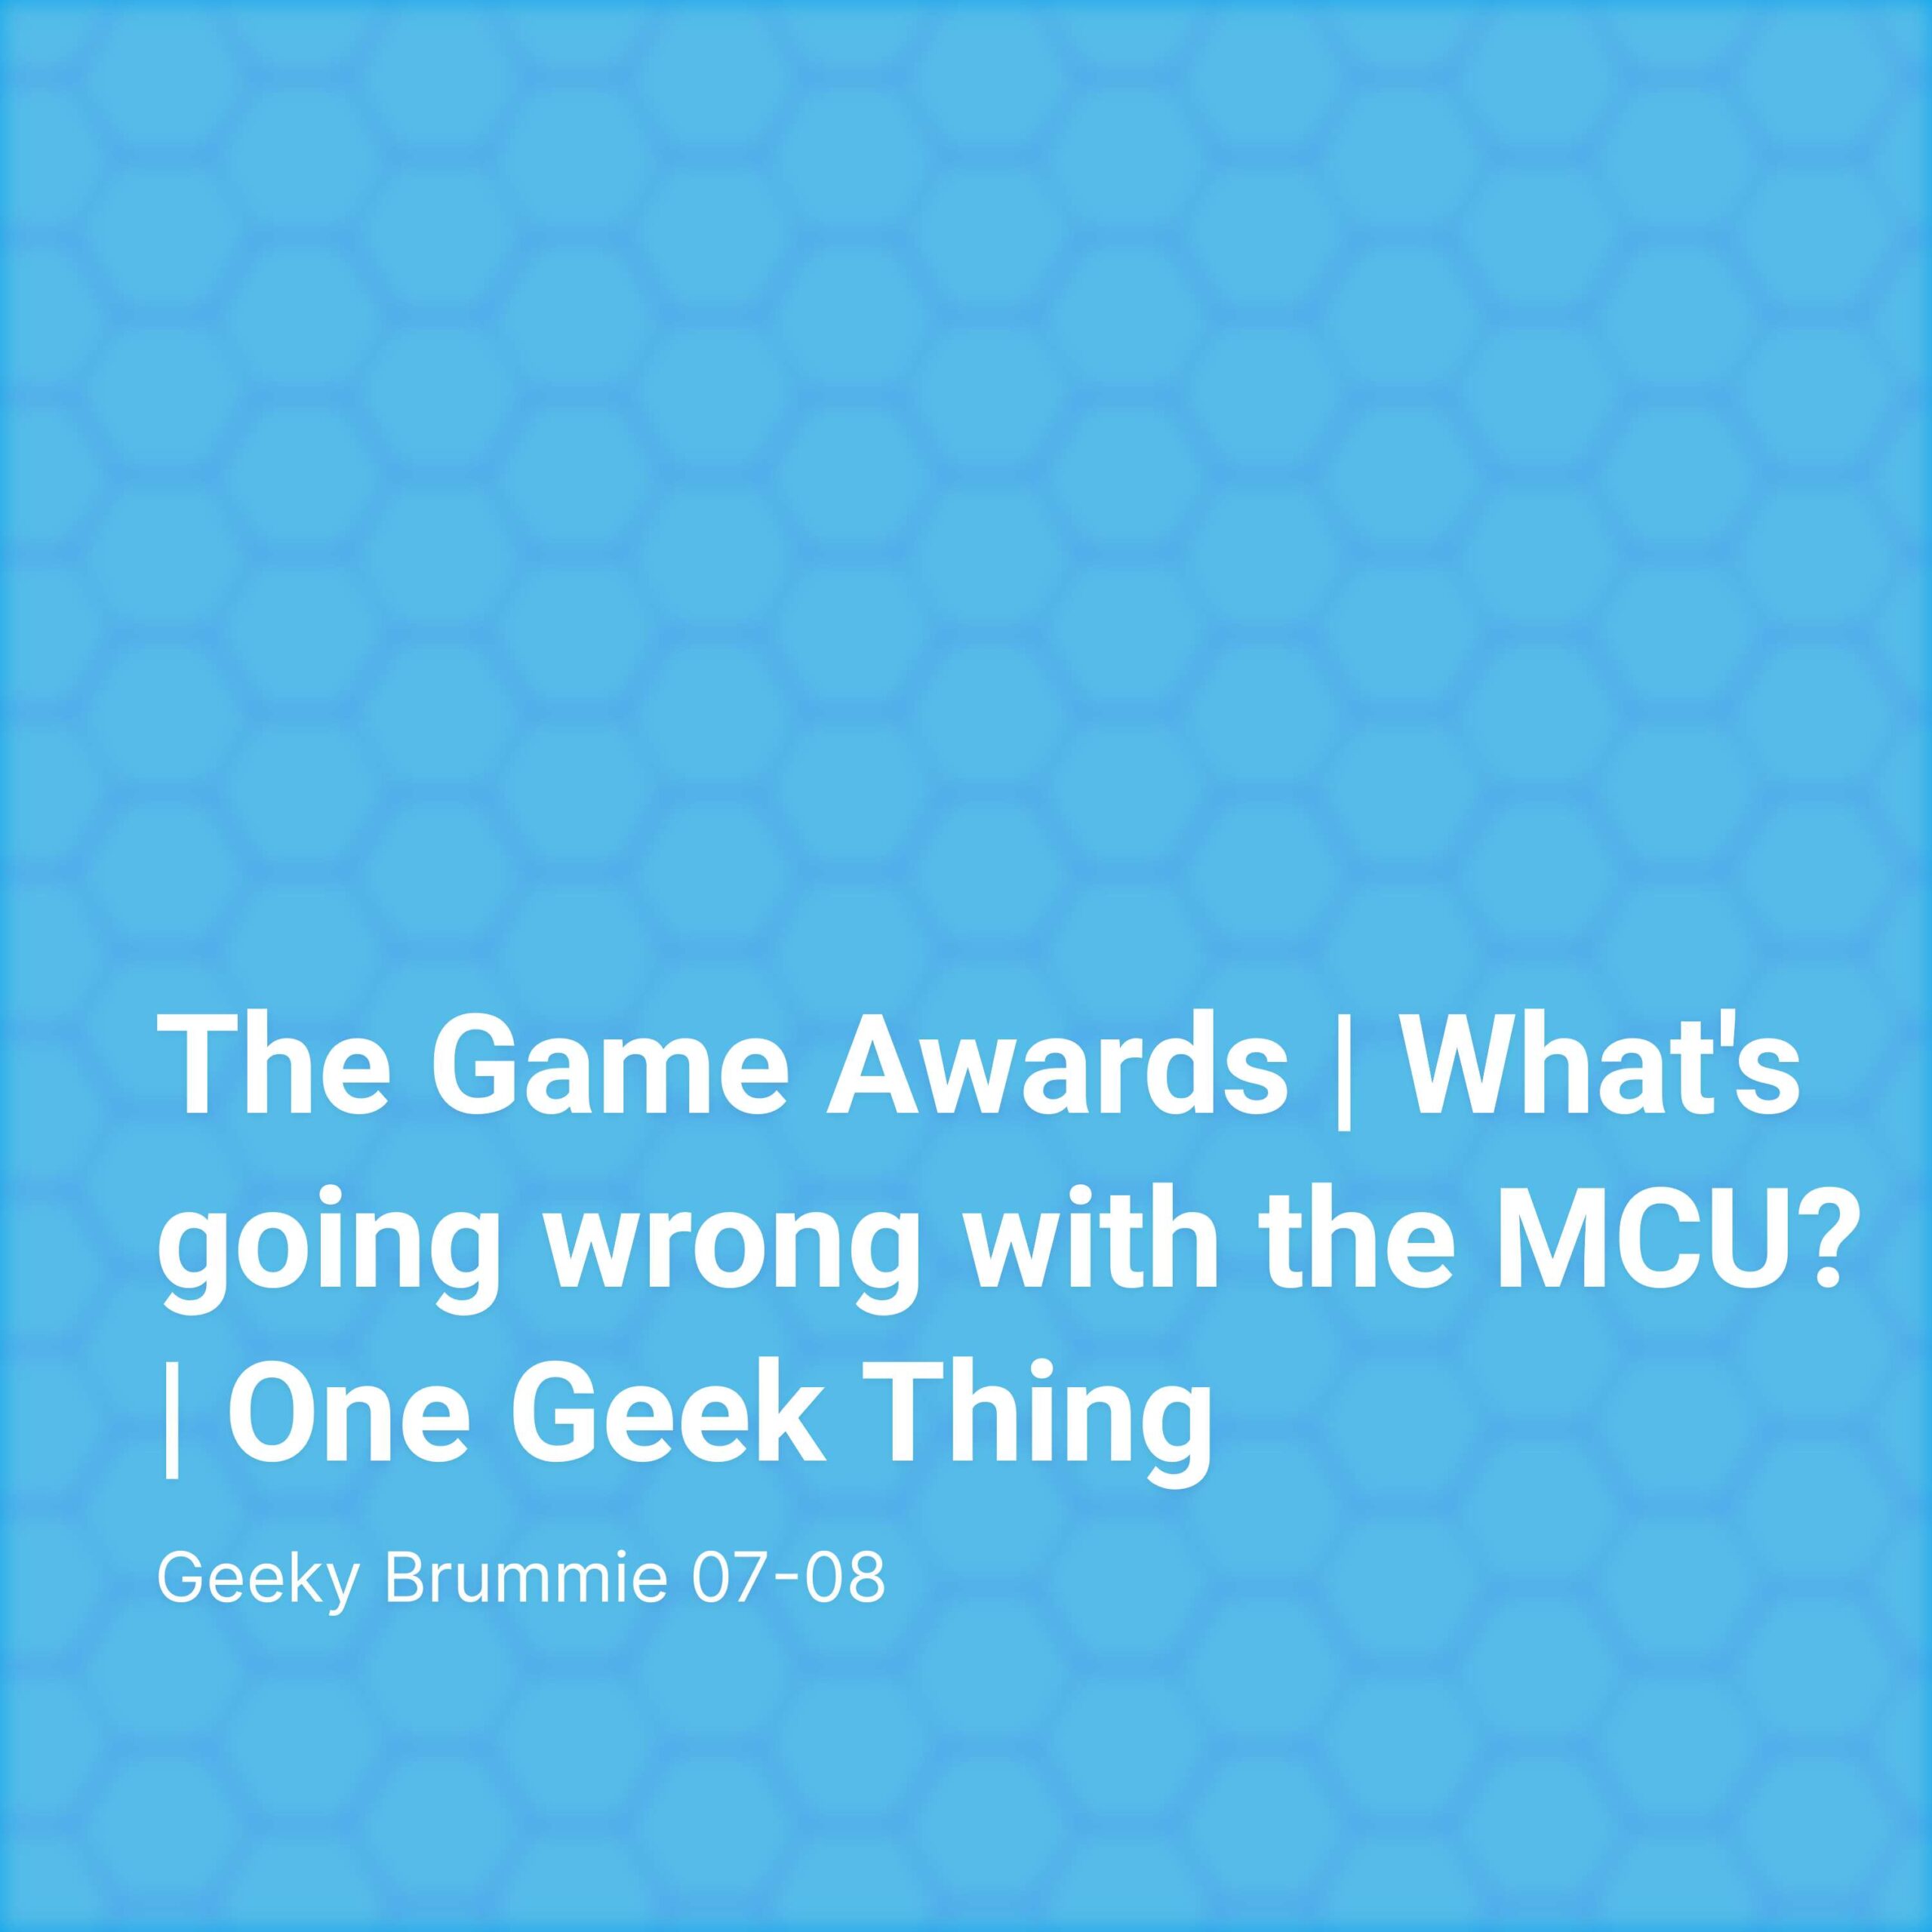 The Game Awards | What's going wrong with the MCU? | One Geek Thing